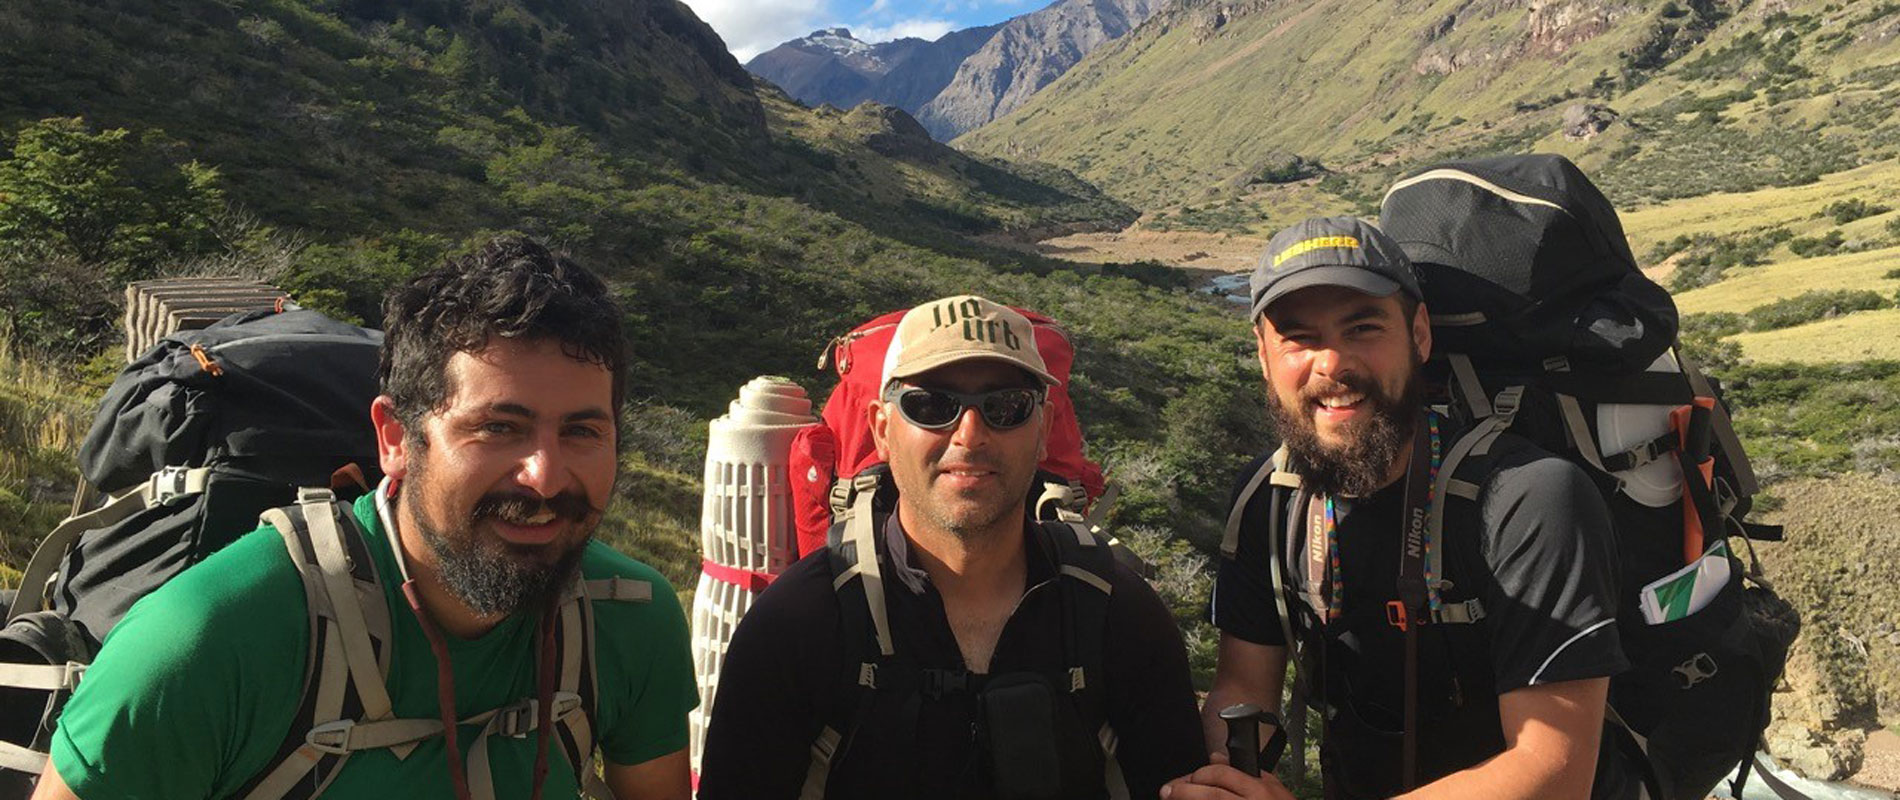 Our three fabulous guide/porters on Wild Chile Trek